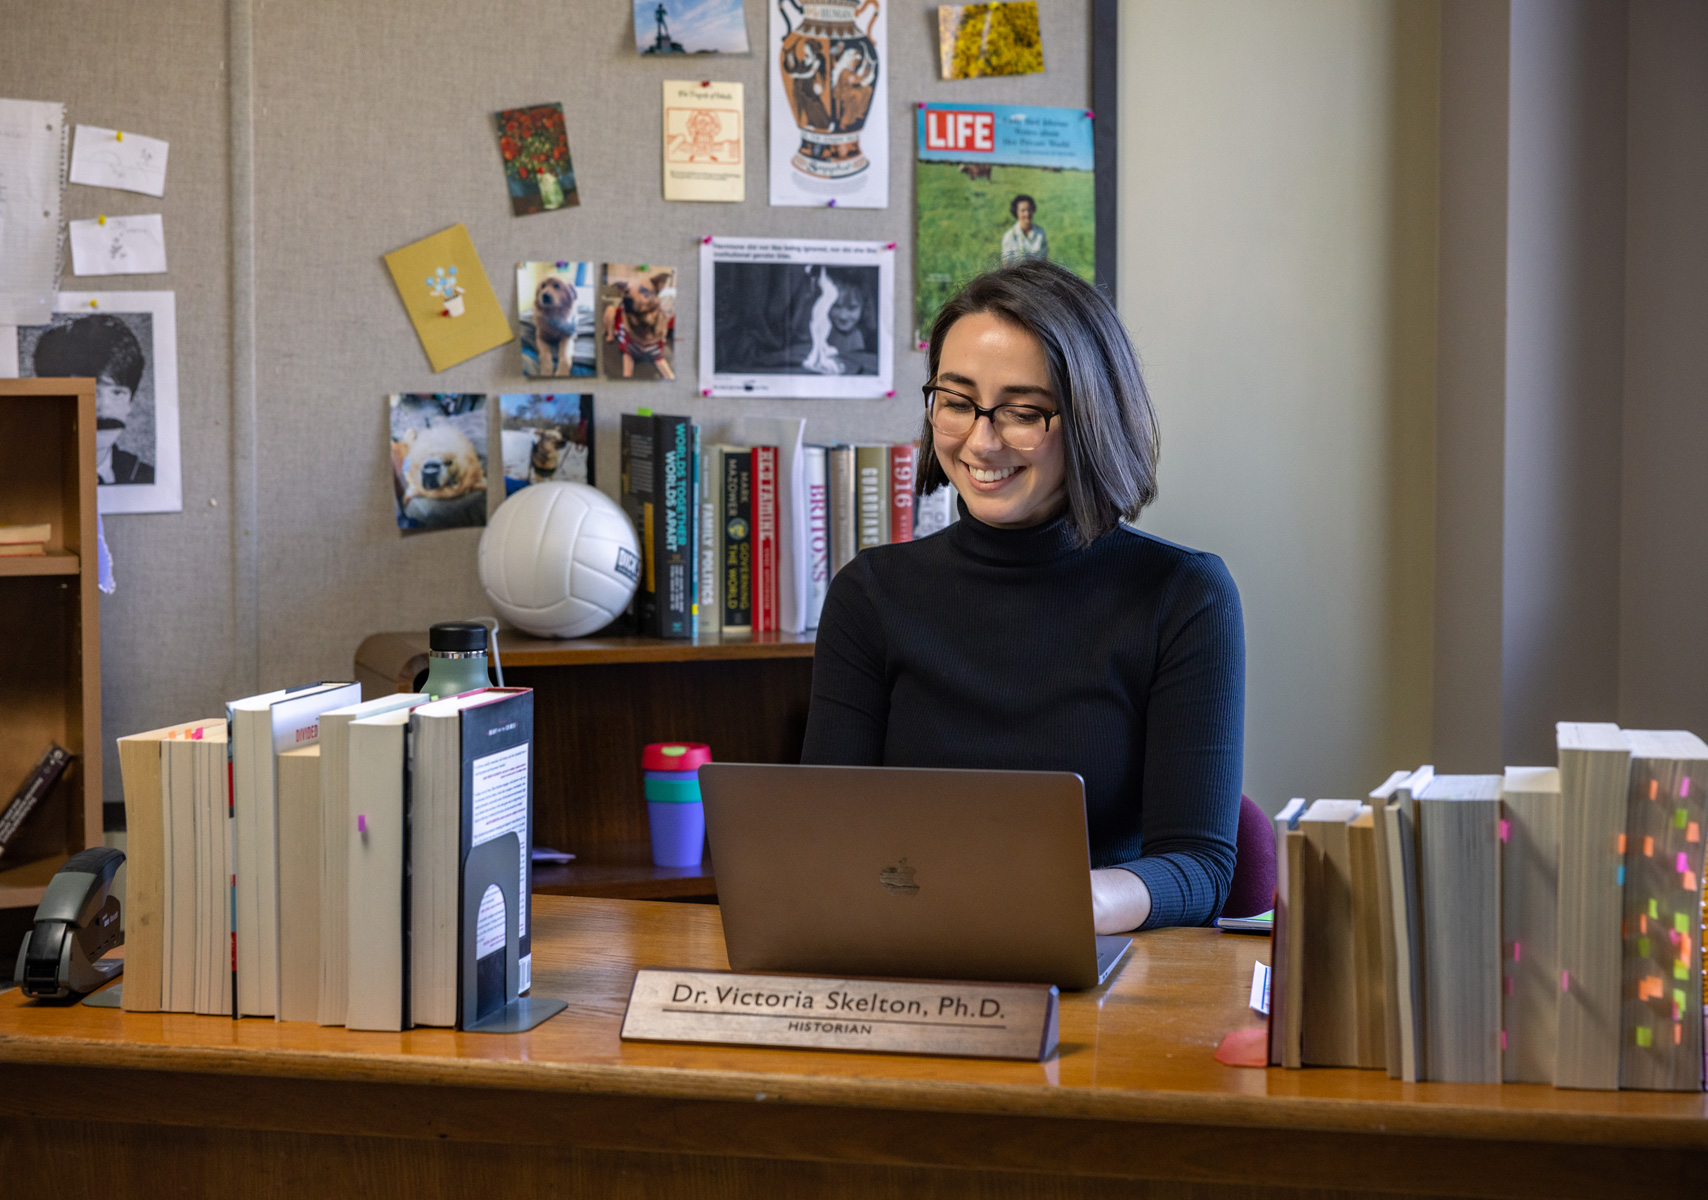 Dr. Victoria Skelton sitting at a desk with books and typing on their laptop